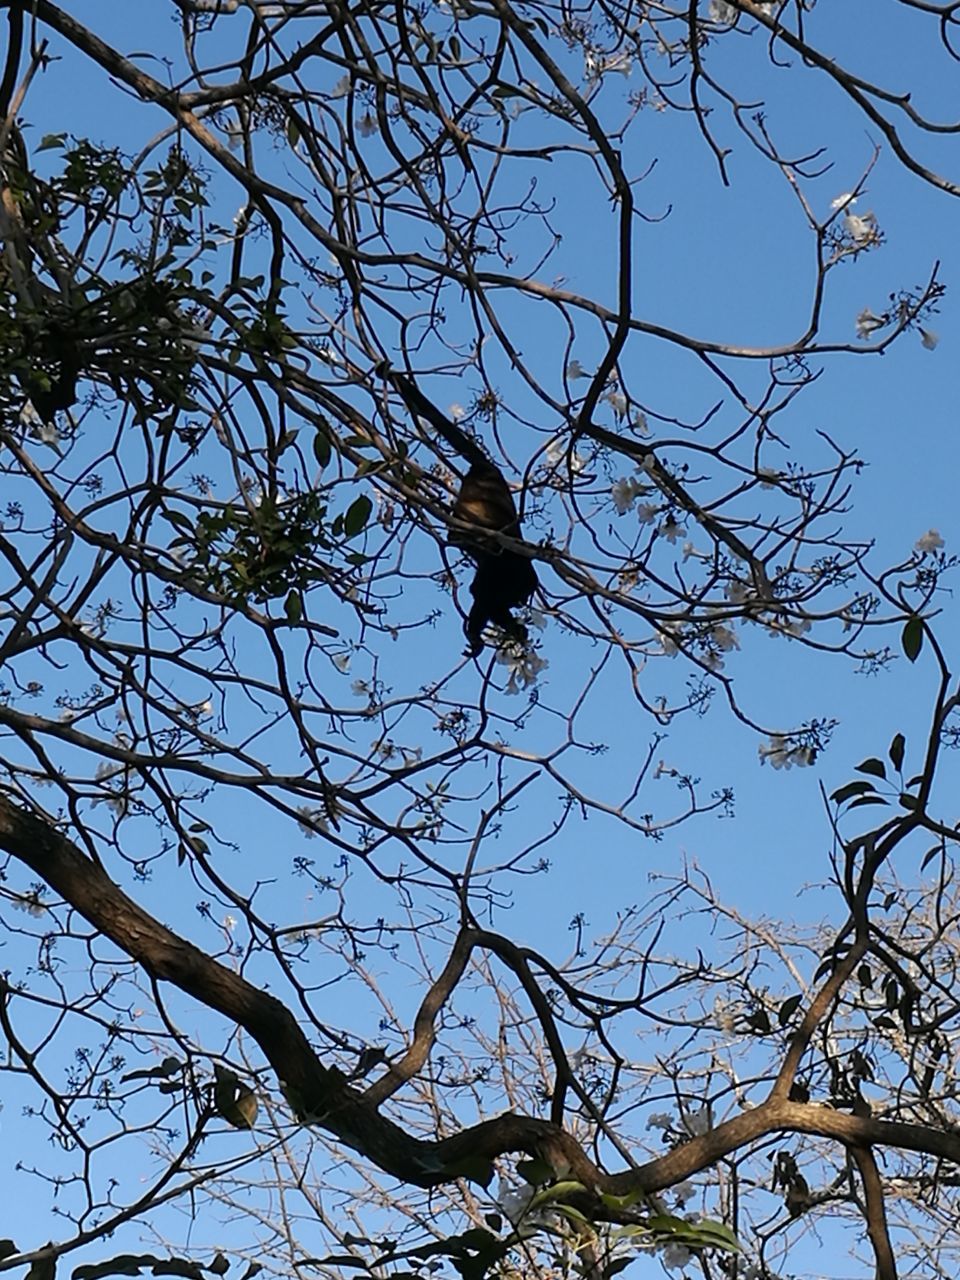 low angle view, bird, animal themes, animals in the wild, tree, one animal, branch, nature, animal wildlife, no people, outdoors, bare tree, sky, beauty in nature, day, perching